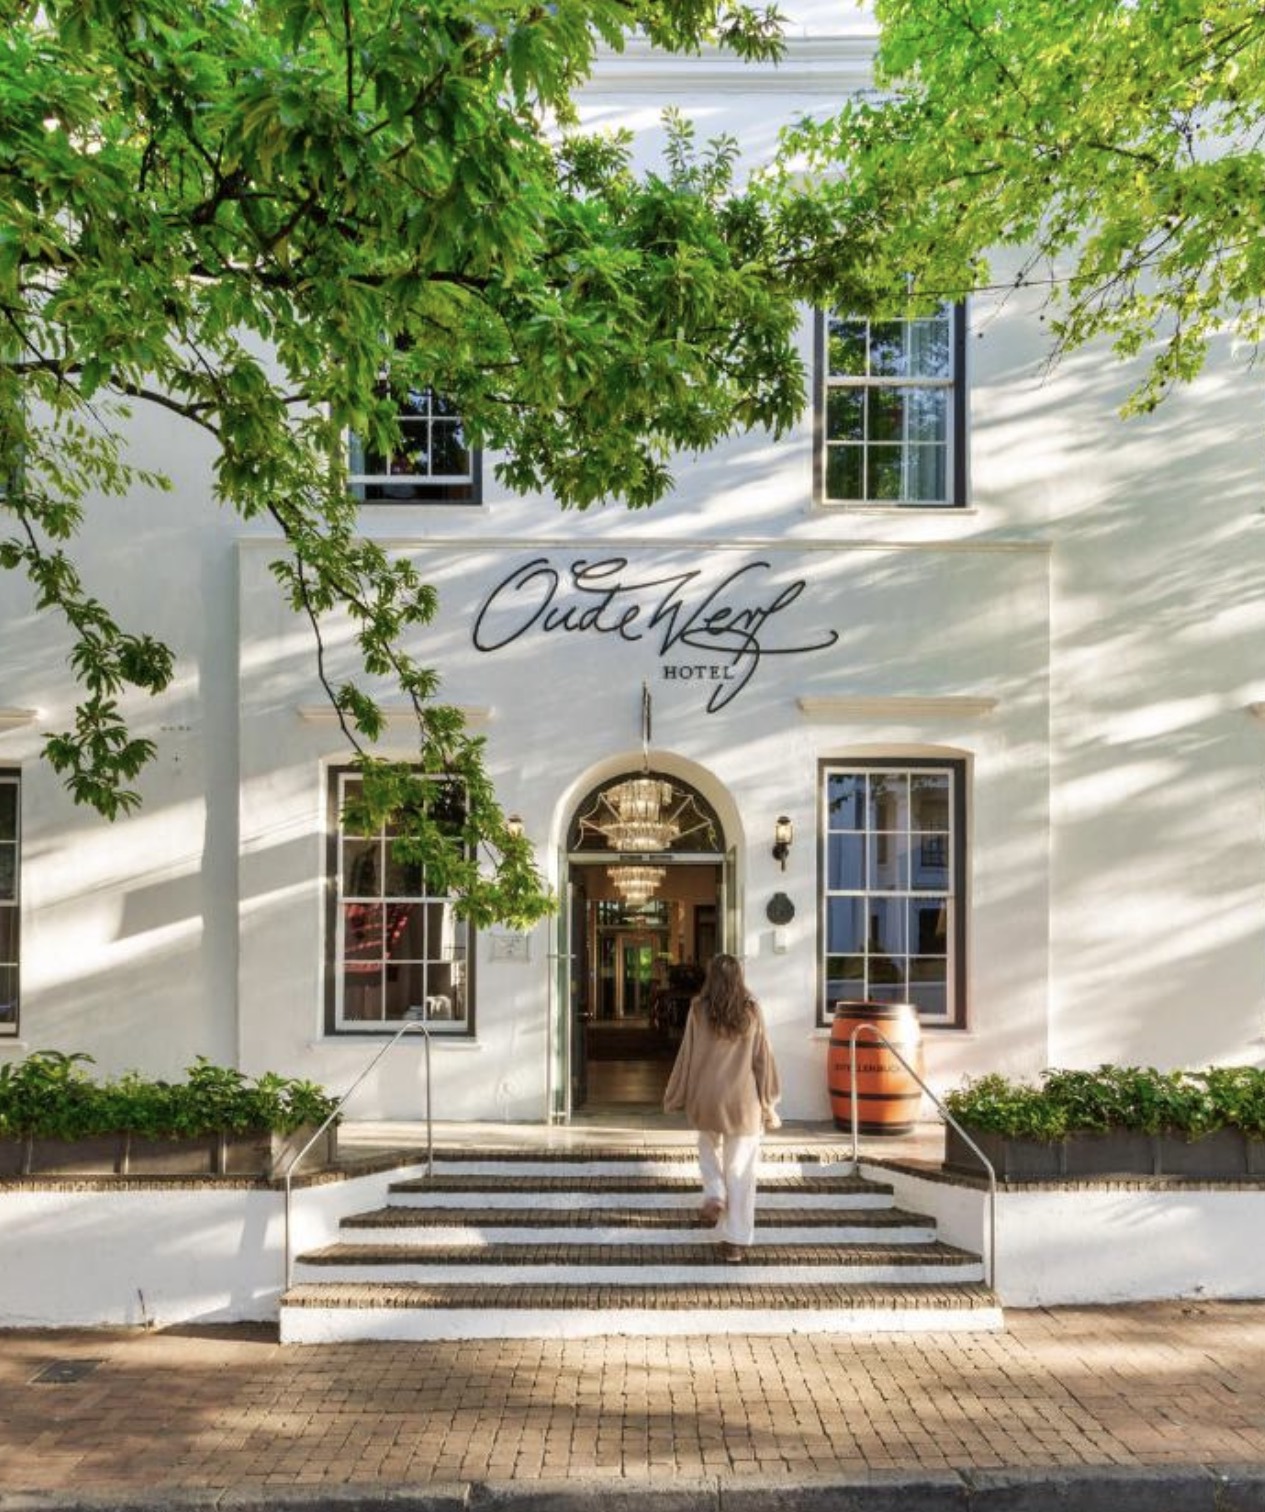 The Oude Werf Hotel is one of the oldest hotels still open in South Africa. Photos via Booking.com